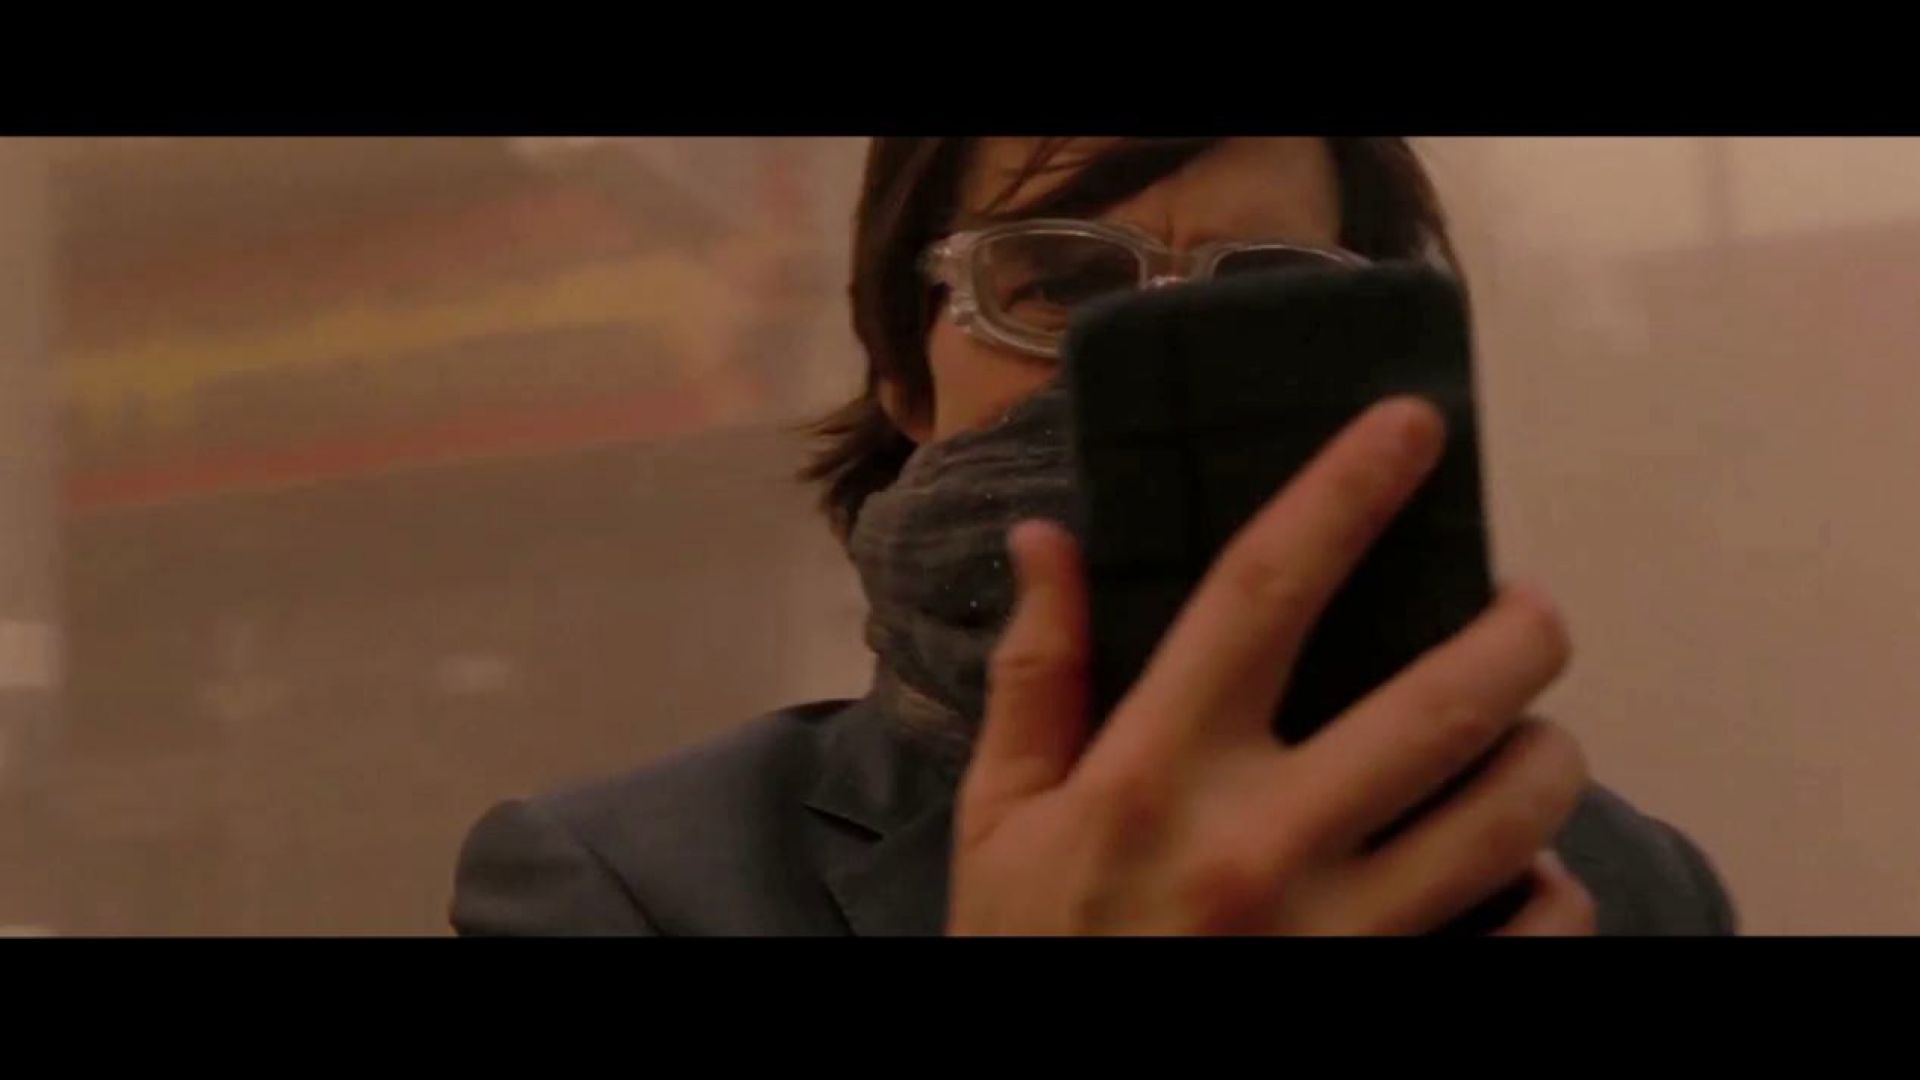 Tom Cruise chases Samuli Edelmann in a sandstorm in Mission: Impossible 4